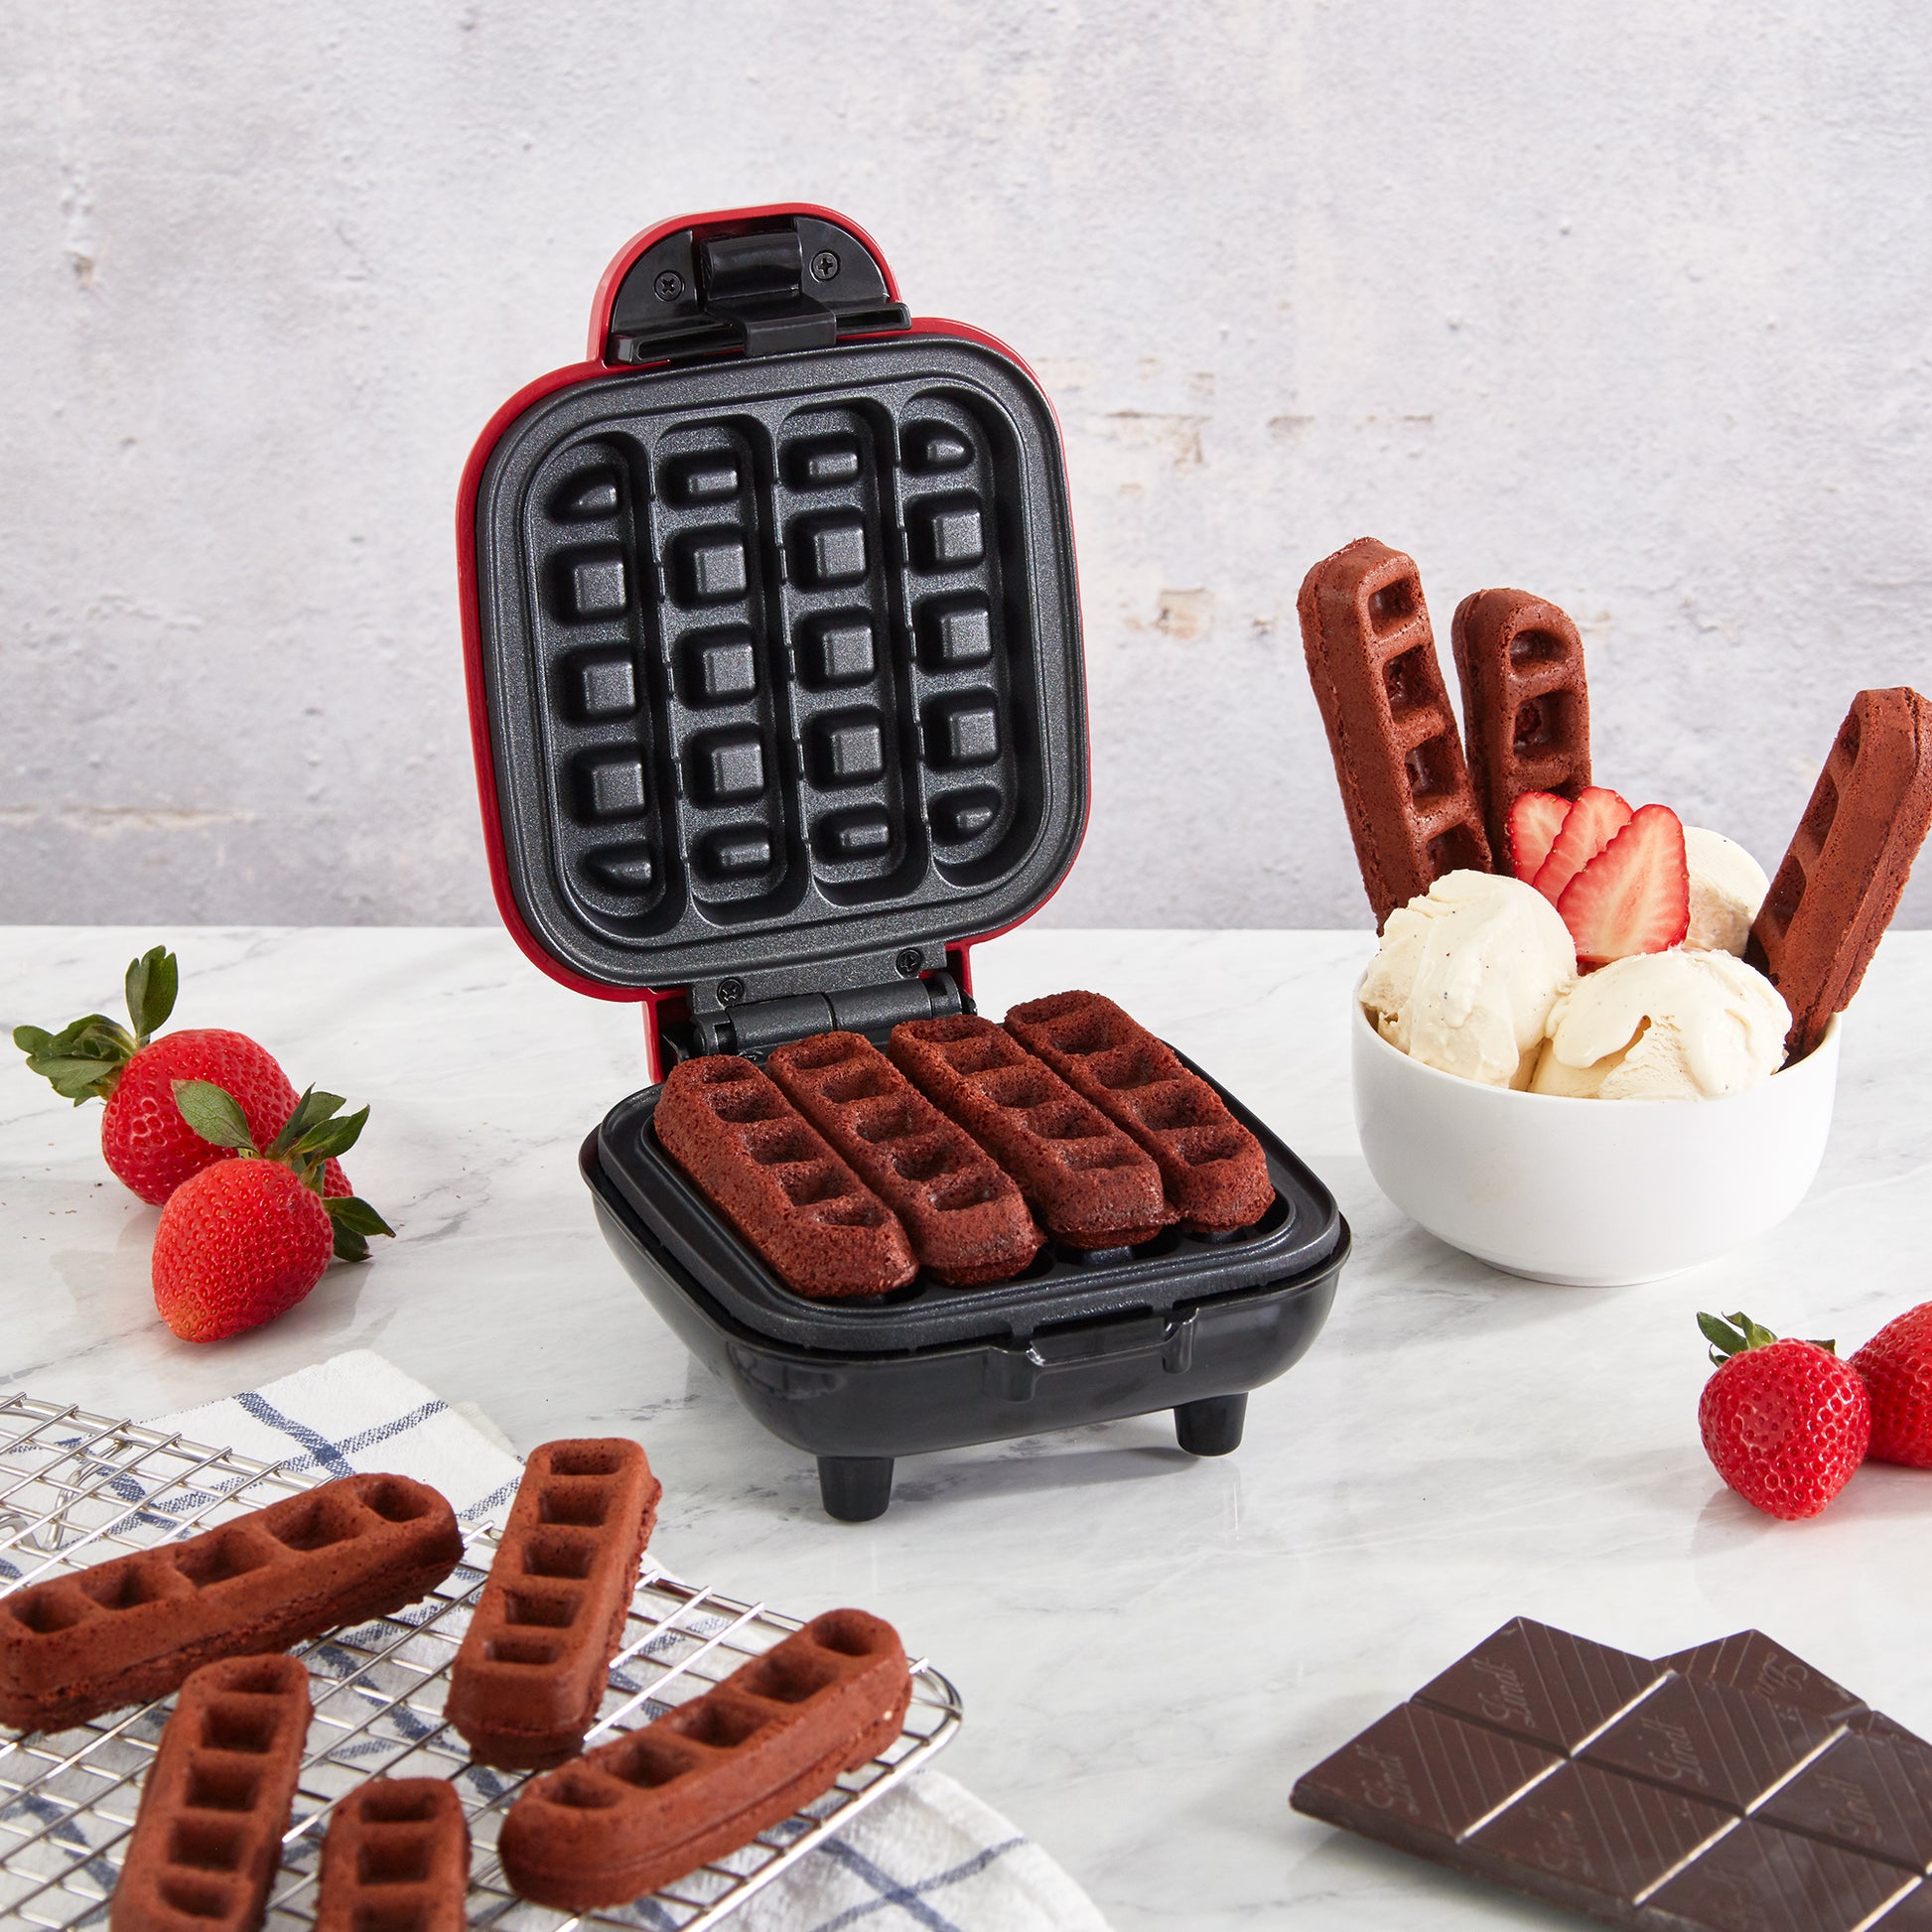 Dash Multi-Plate Mini Waffle Maker $29.99 in Stock (See The Video